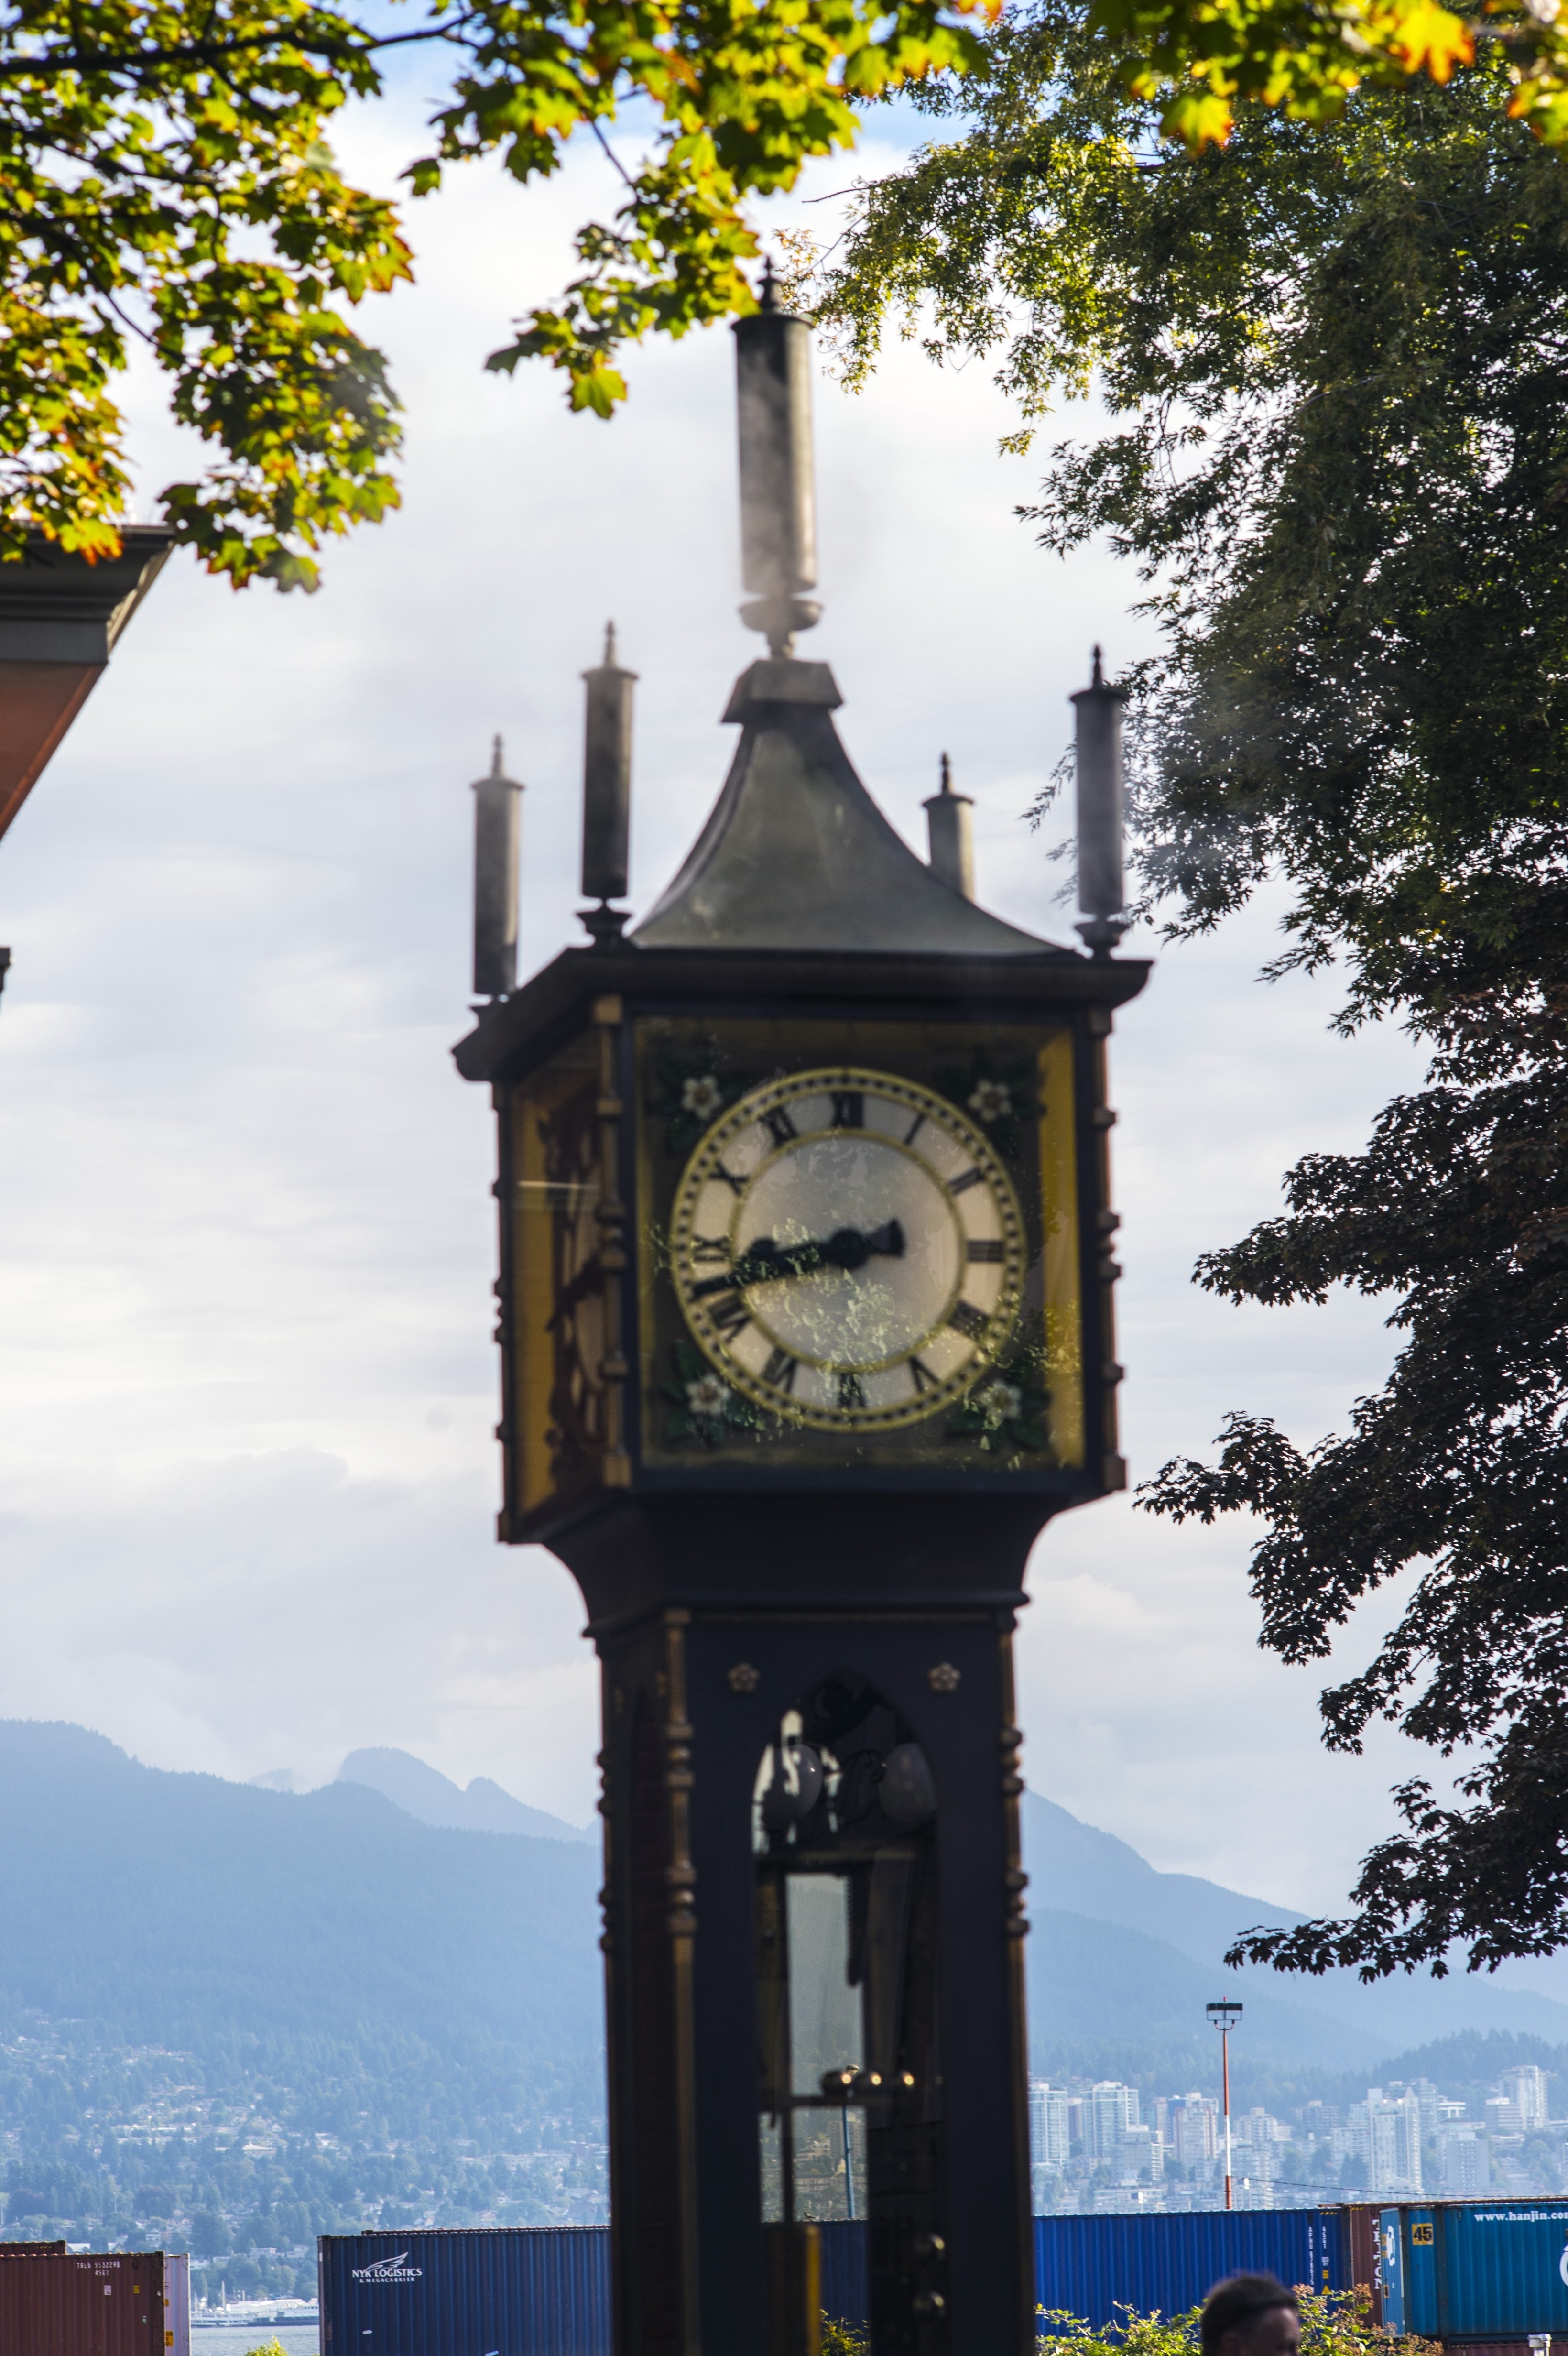 Historic steam clock in an urban setting with trees and a mountainous backdrop